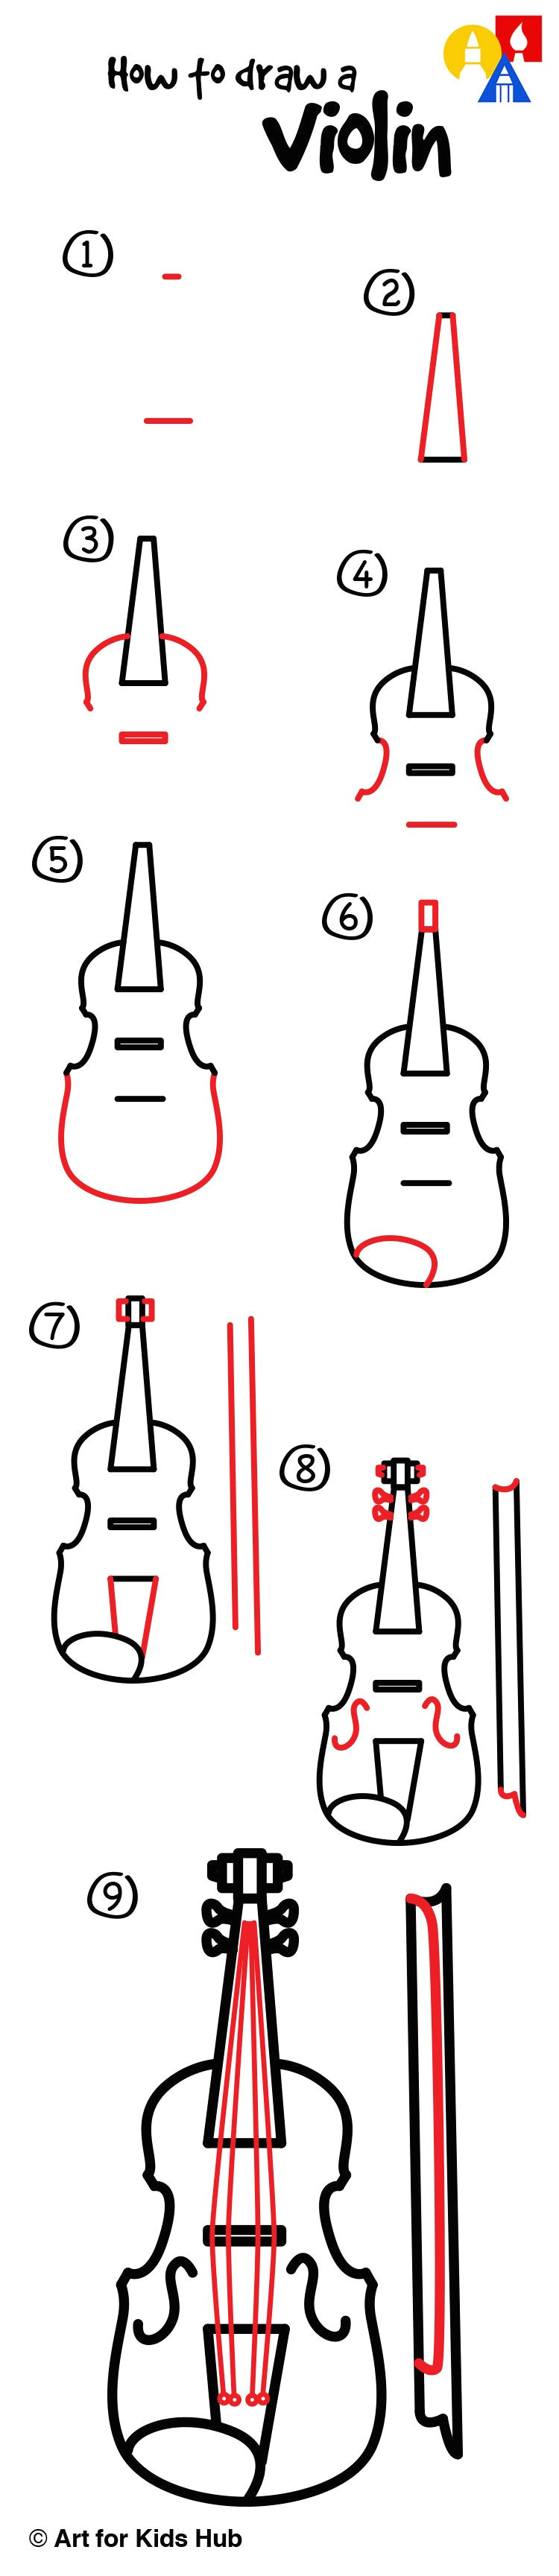 Drawing Easy Violin How to Draw A Violin Art for Kids Hub Interactive orchestra